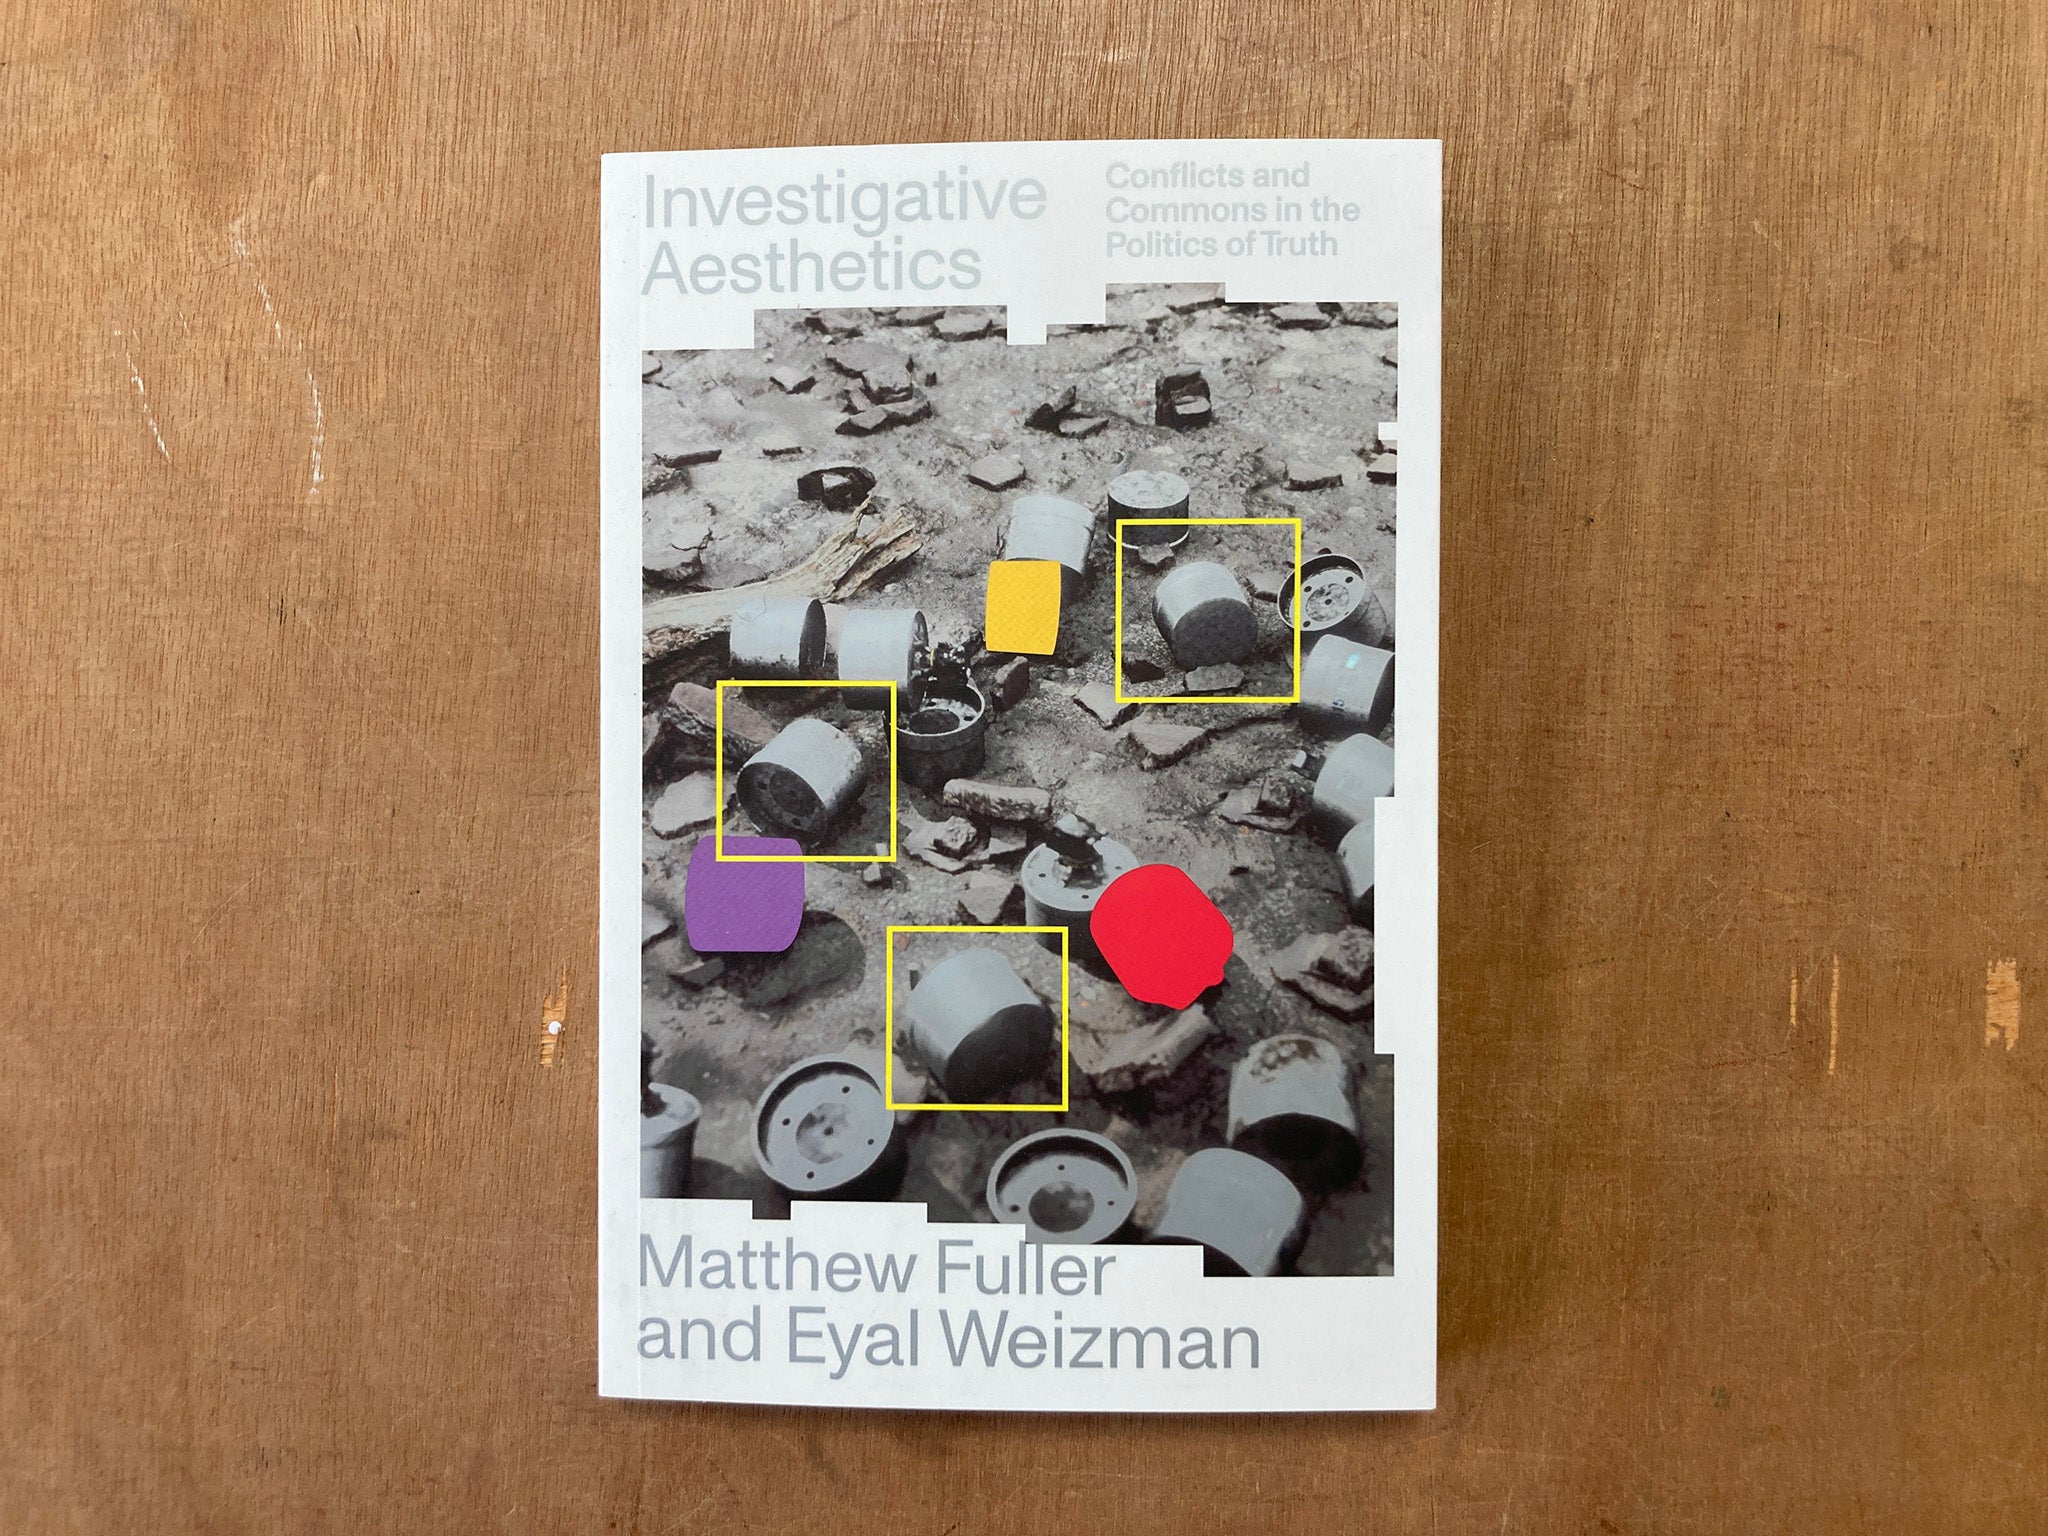 INVESTIGATIVE AESTHETICS: CONFLICTS AND COMMONS IN THE POLITICS OF TRUTH by Matthew Fuller and Eyal Weizman